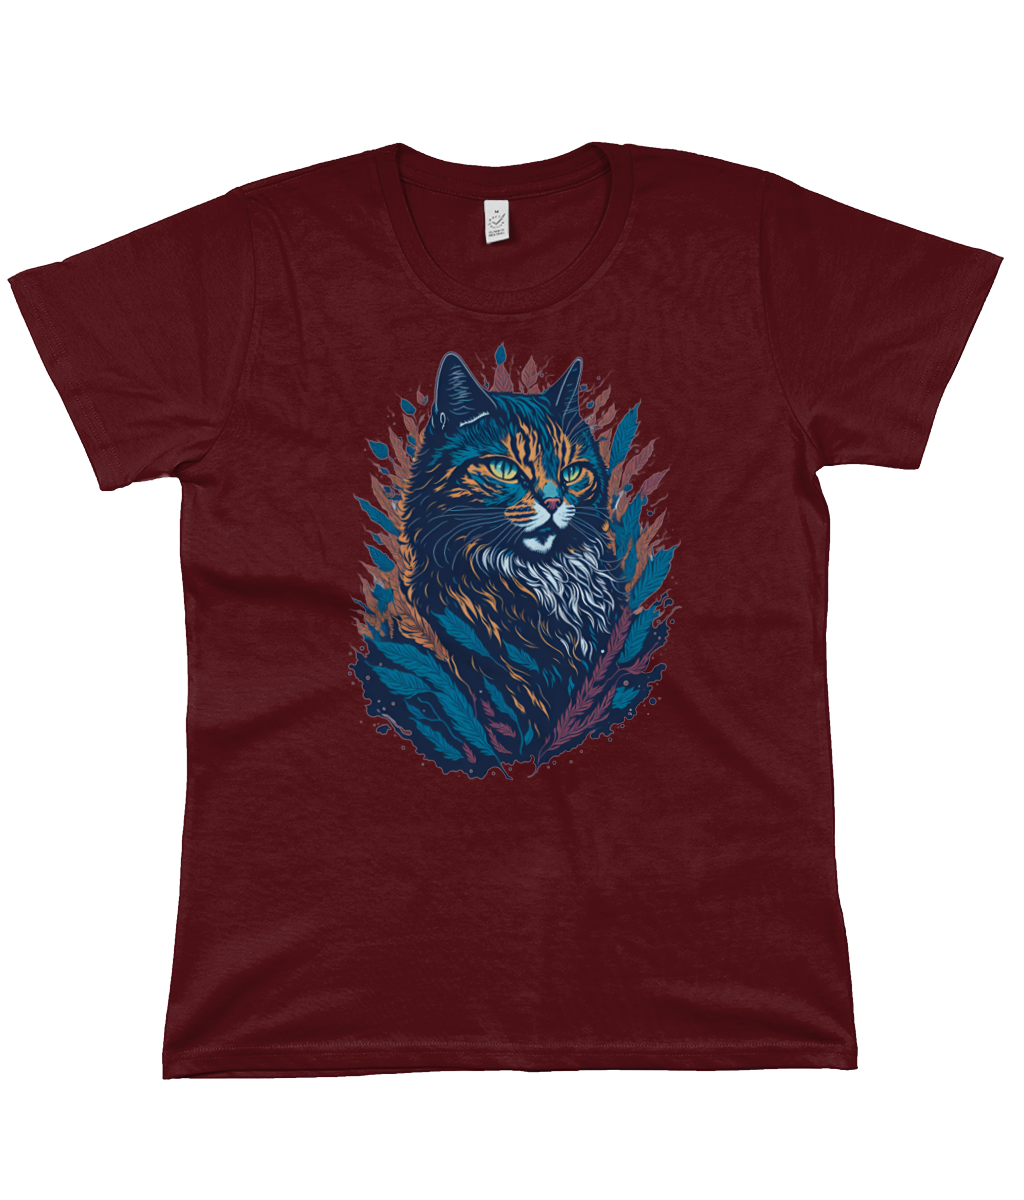 Fans of Catastic "Stealth Sapphire" Classic Jersey Women's T-Shirt